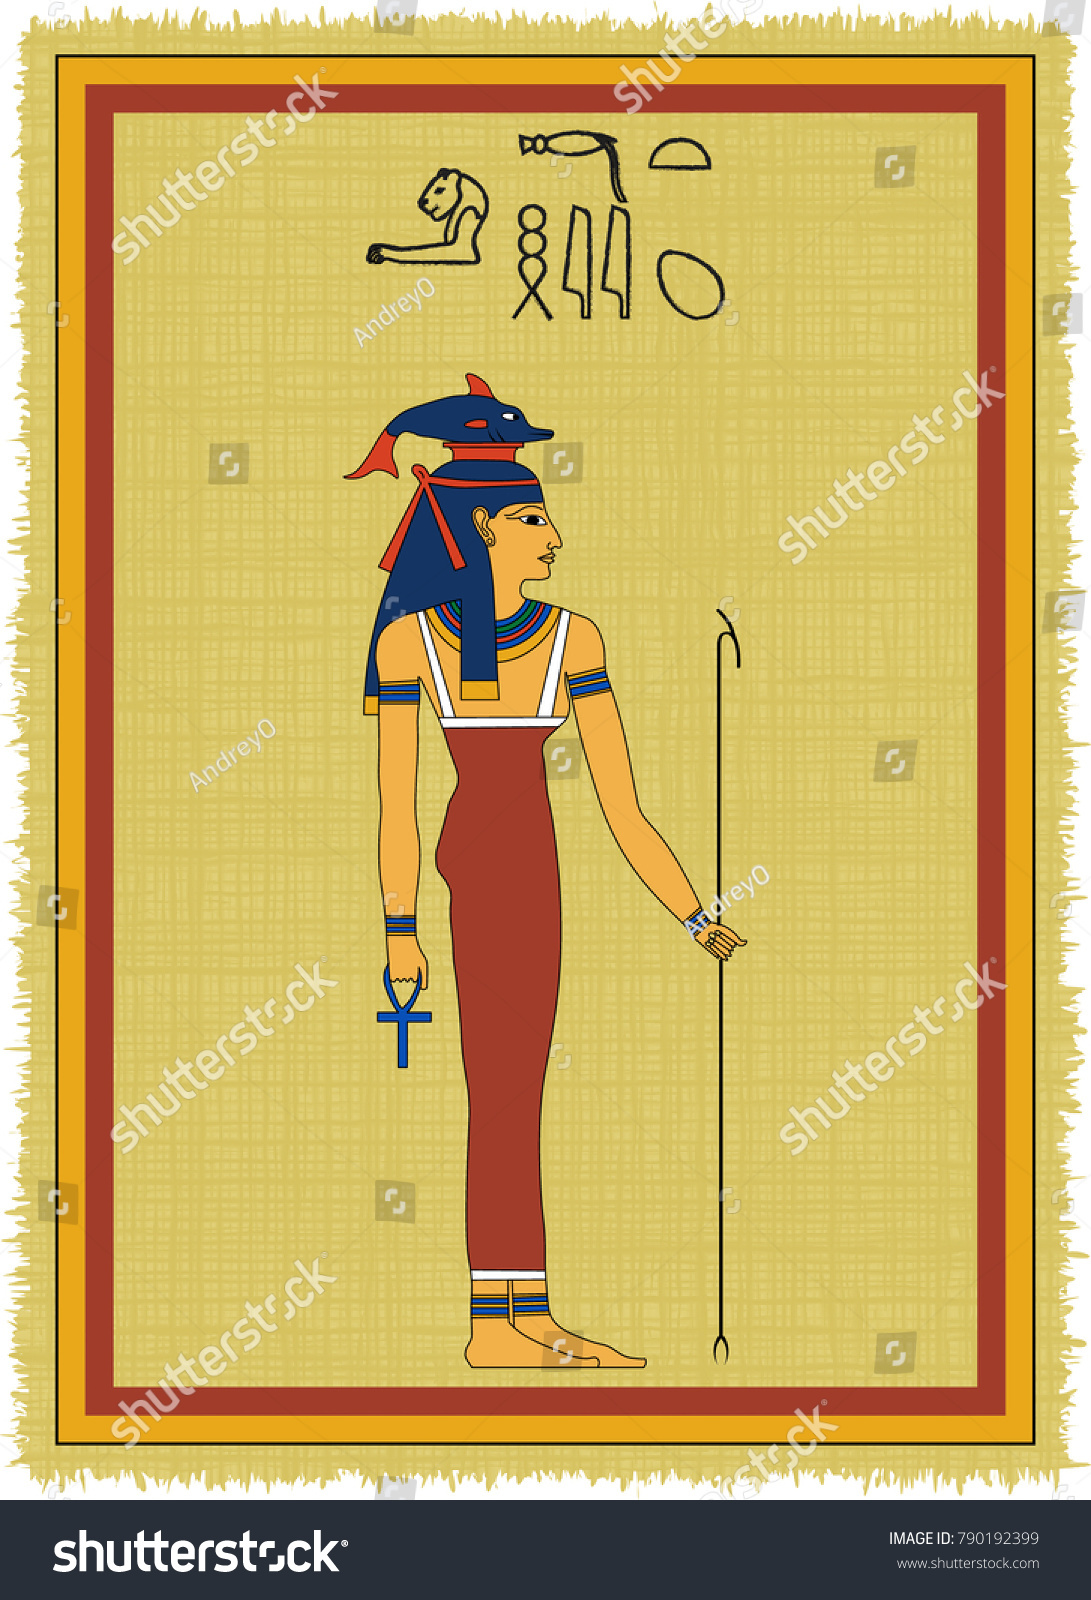 stock-vector-papyrus-with-the-image-of-h